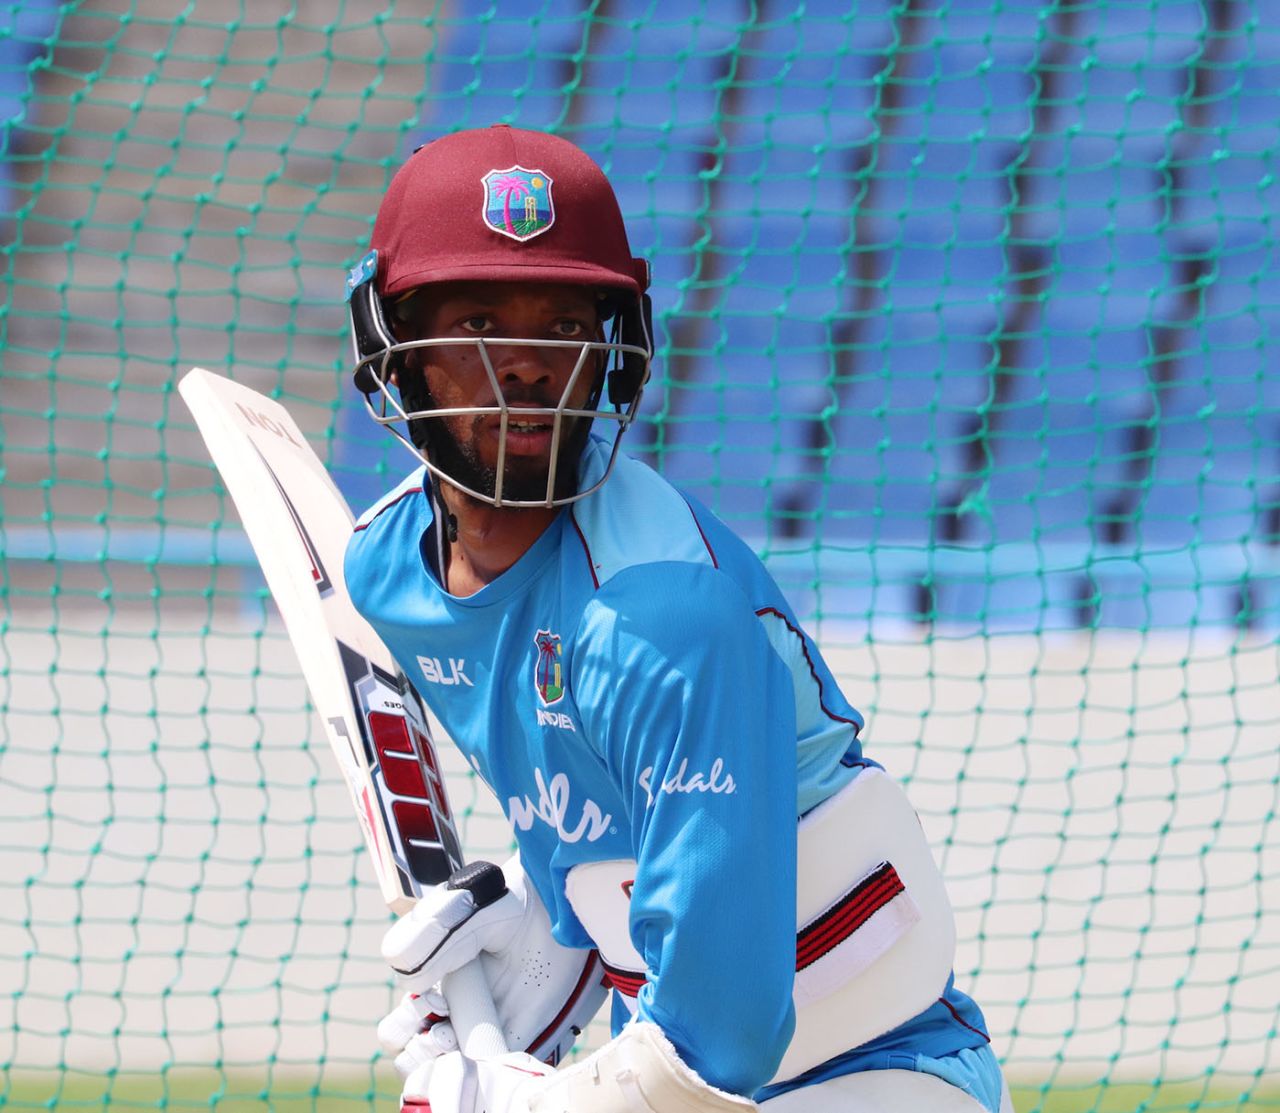 Roston Chase has a hit in the nets, Antigua, August 19, 2019